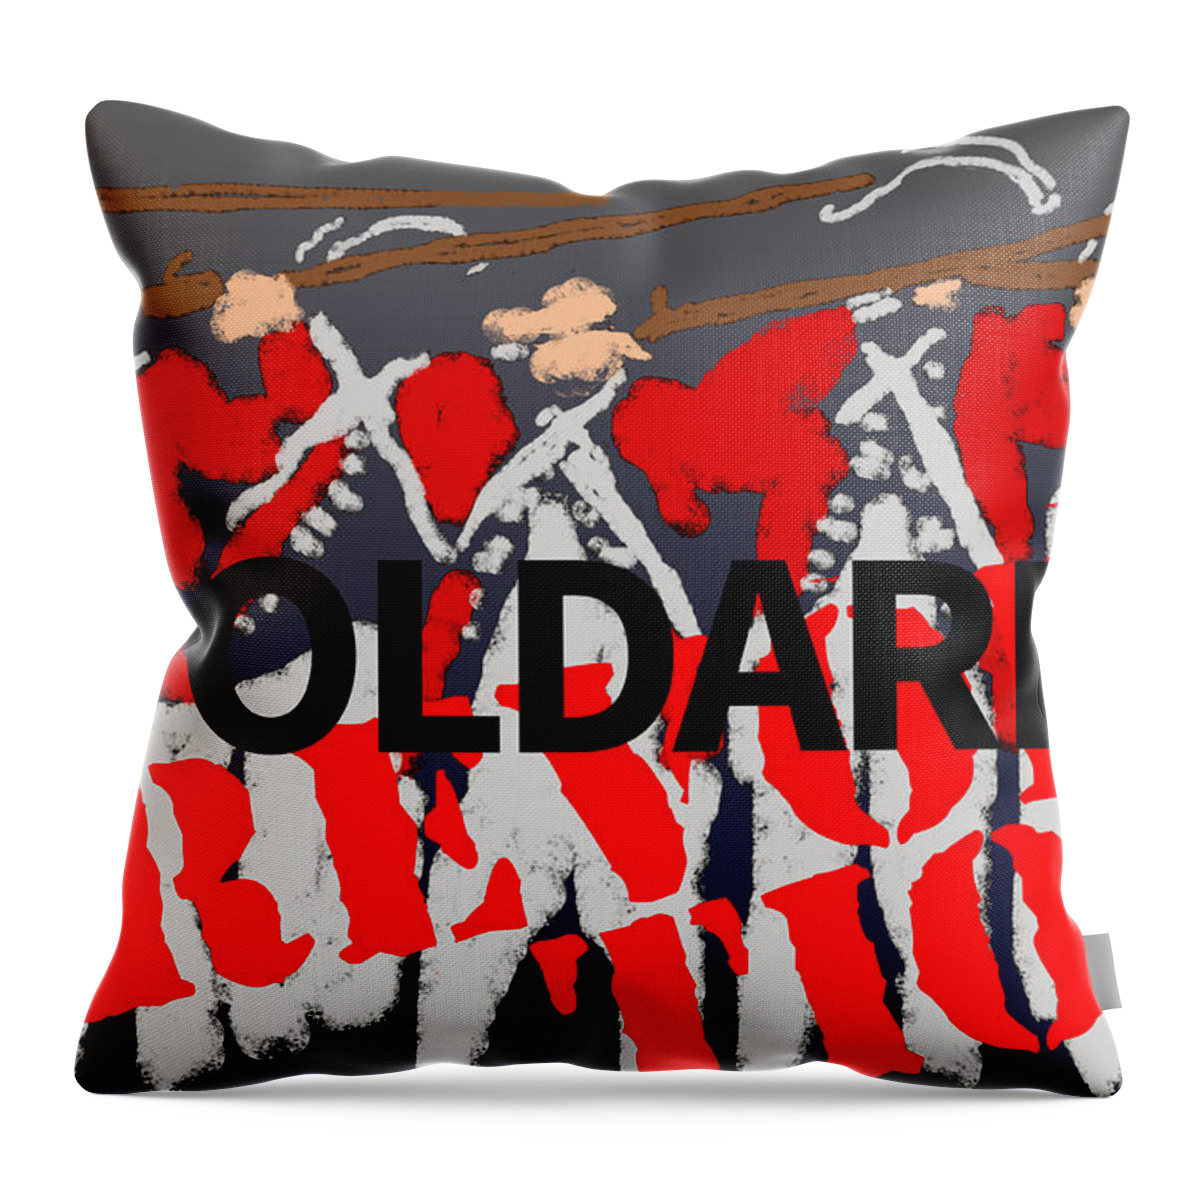 Poldark Throw Pillow featuring the photograph Poldark Revolution by Suzanne Powers